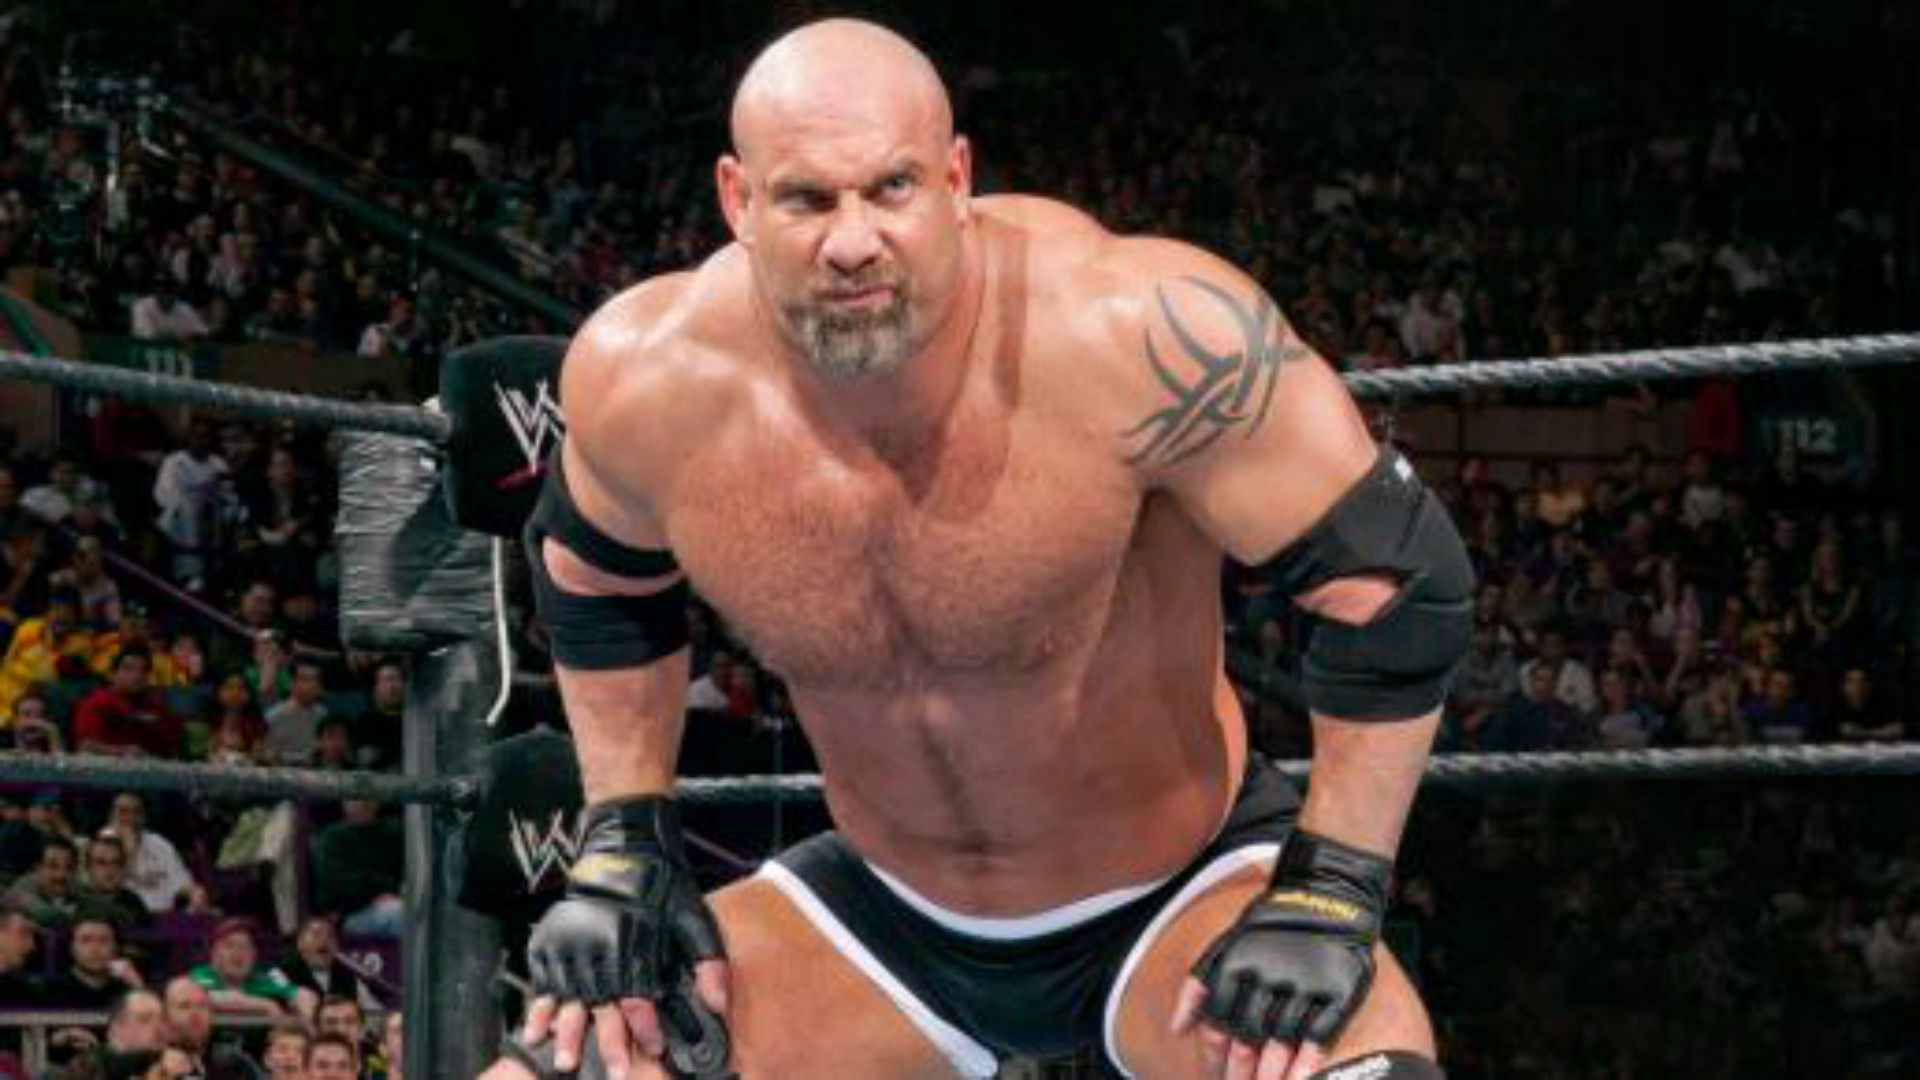 1920x1080 WWE Survivor Series: Can Goldberg cope with Brock Lesnar?